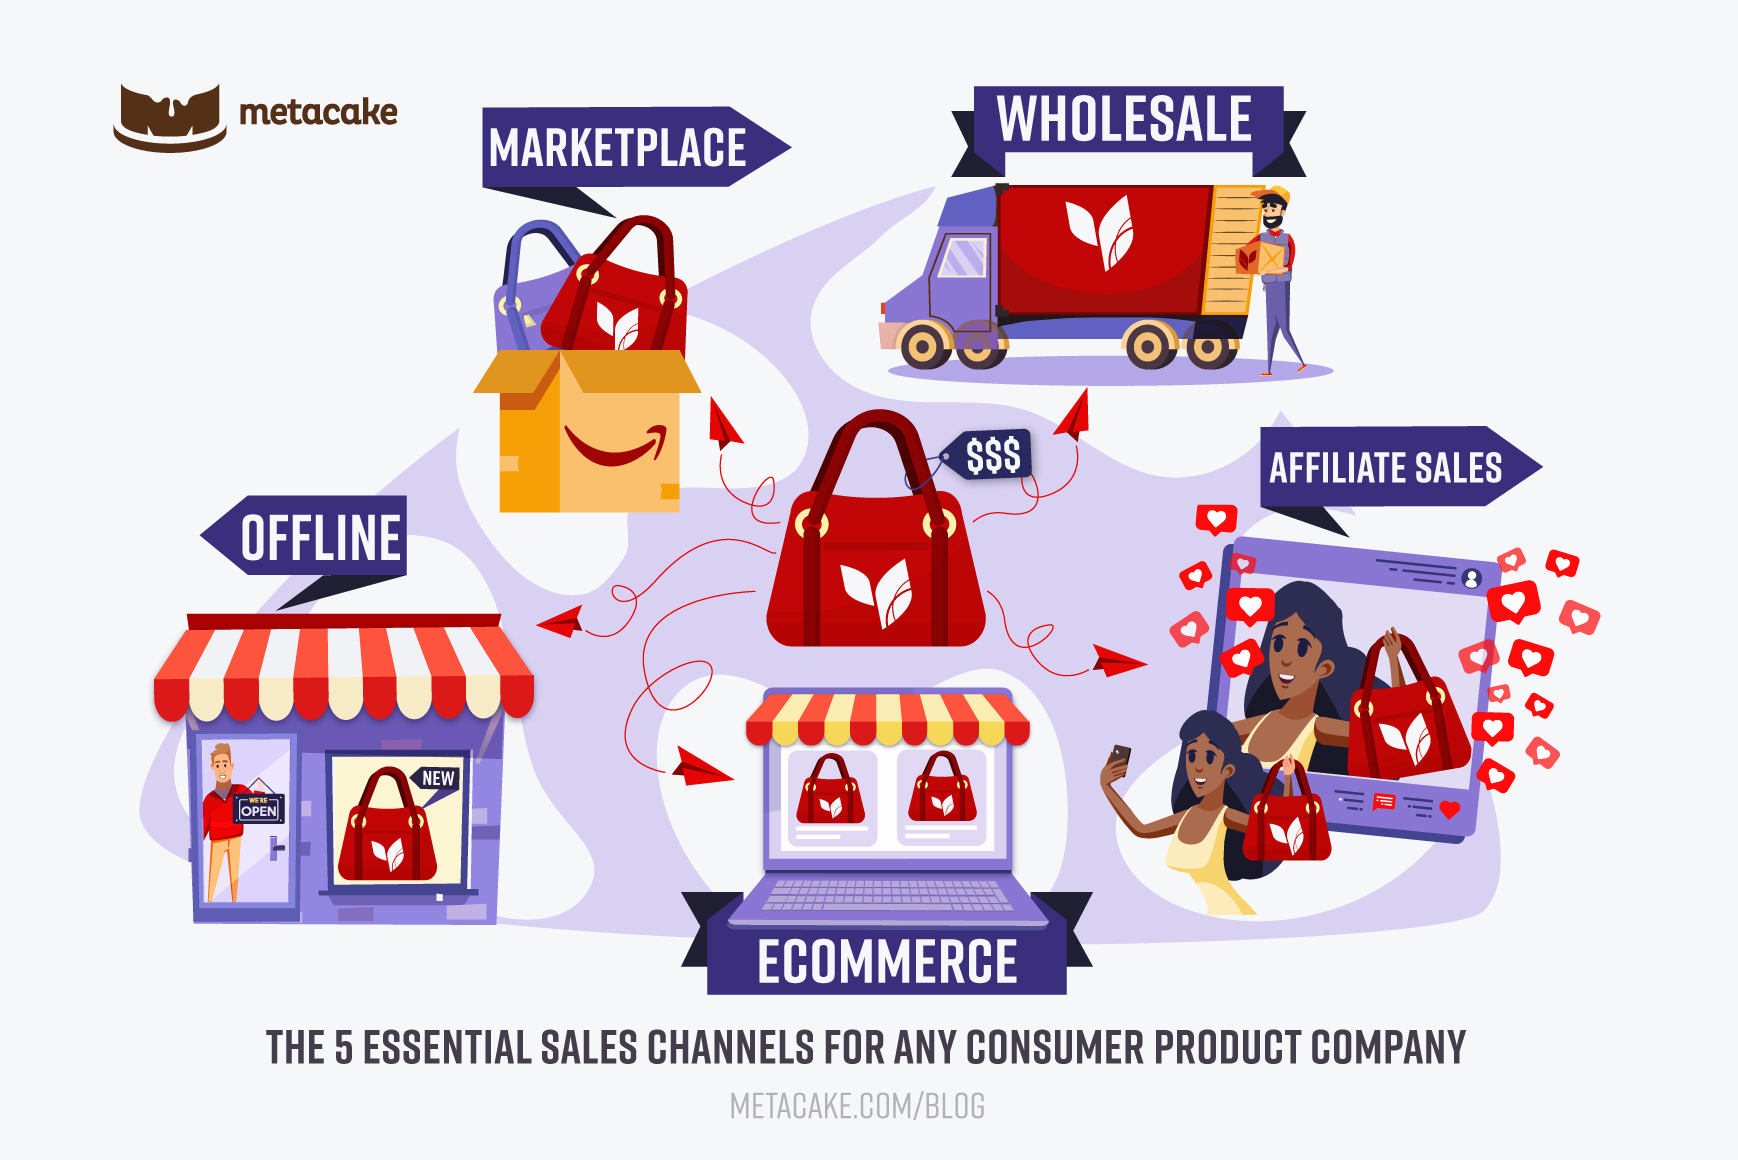 https://metacake.com/wp-content/uploads/2021/09/The-5-Essential-Sales-Channels-for-Any-Consumer-Product-Company-1738x1160-textlogo.jpg